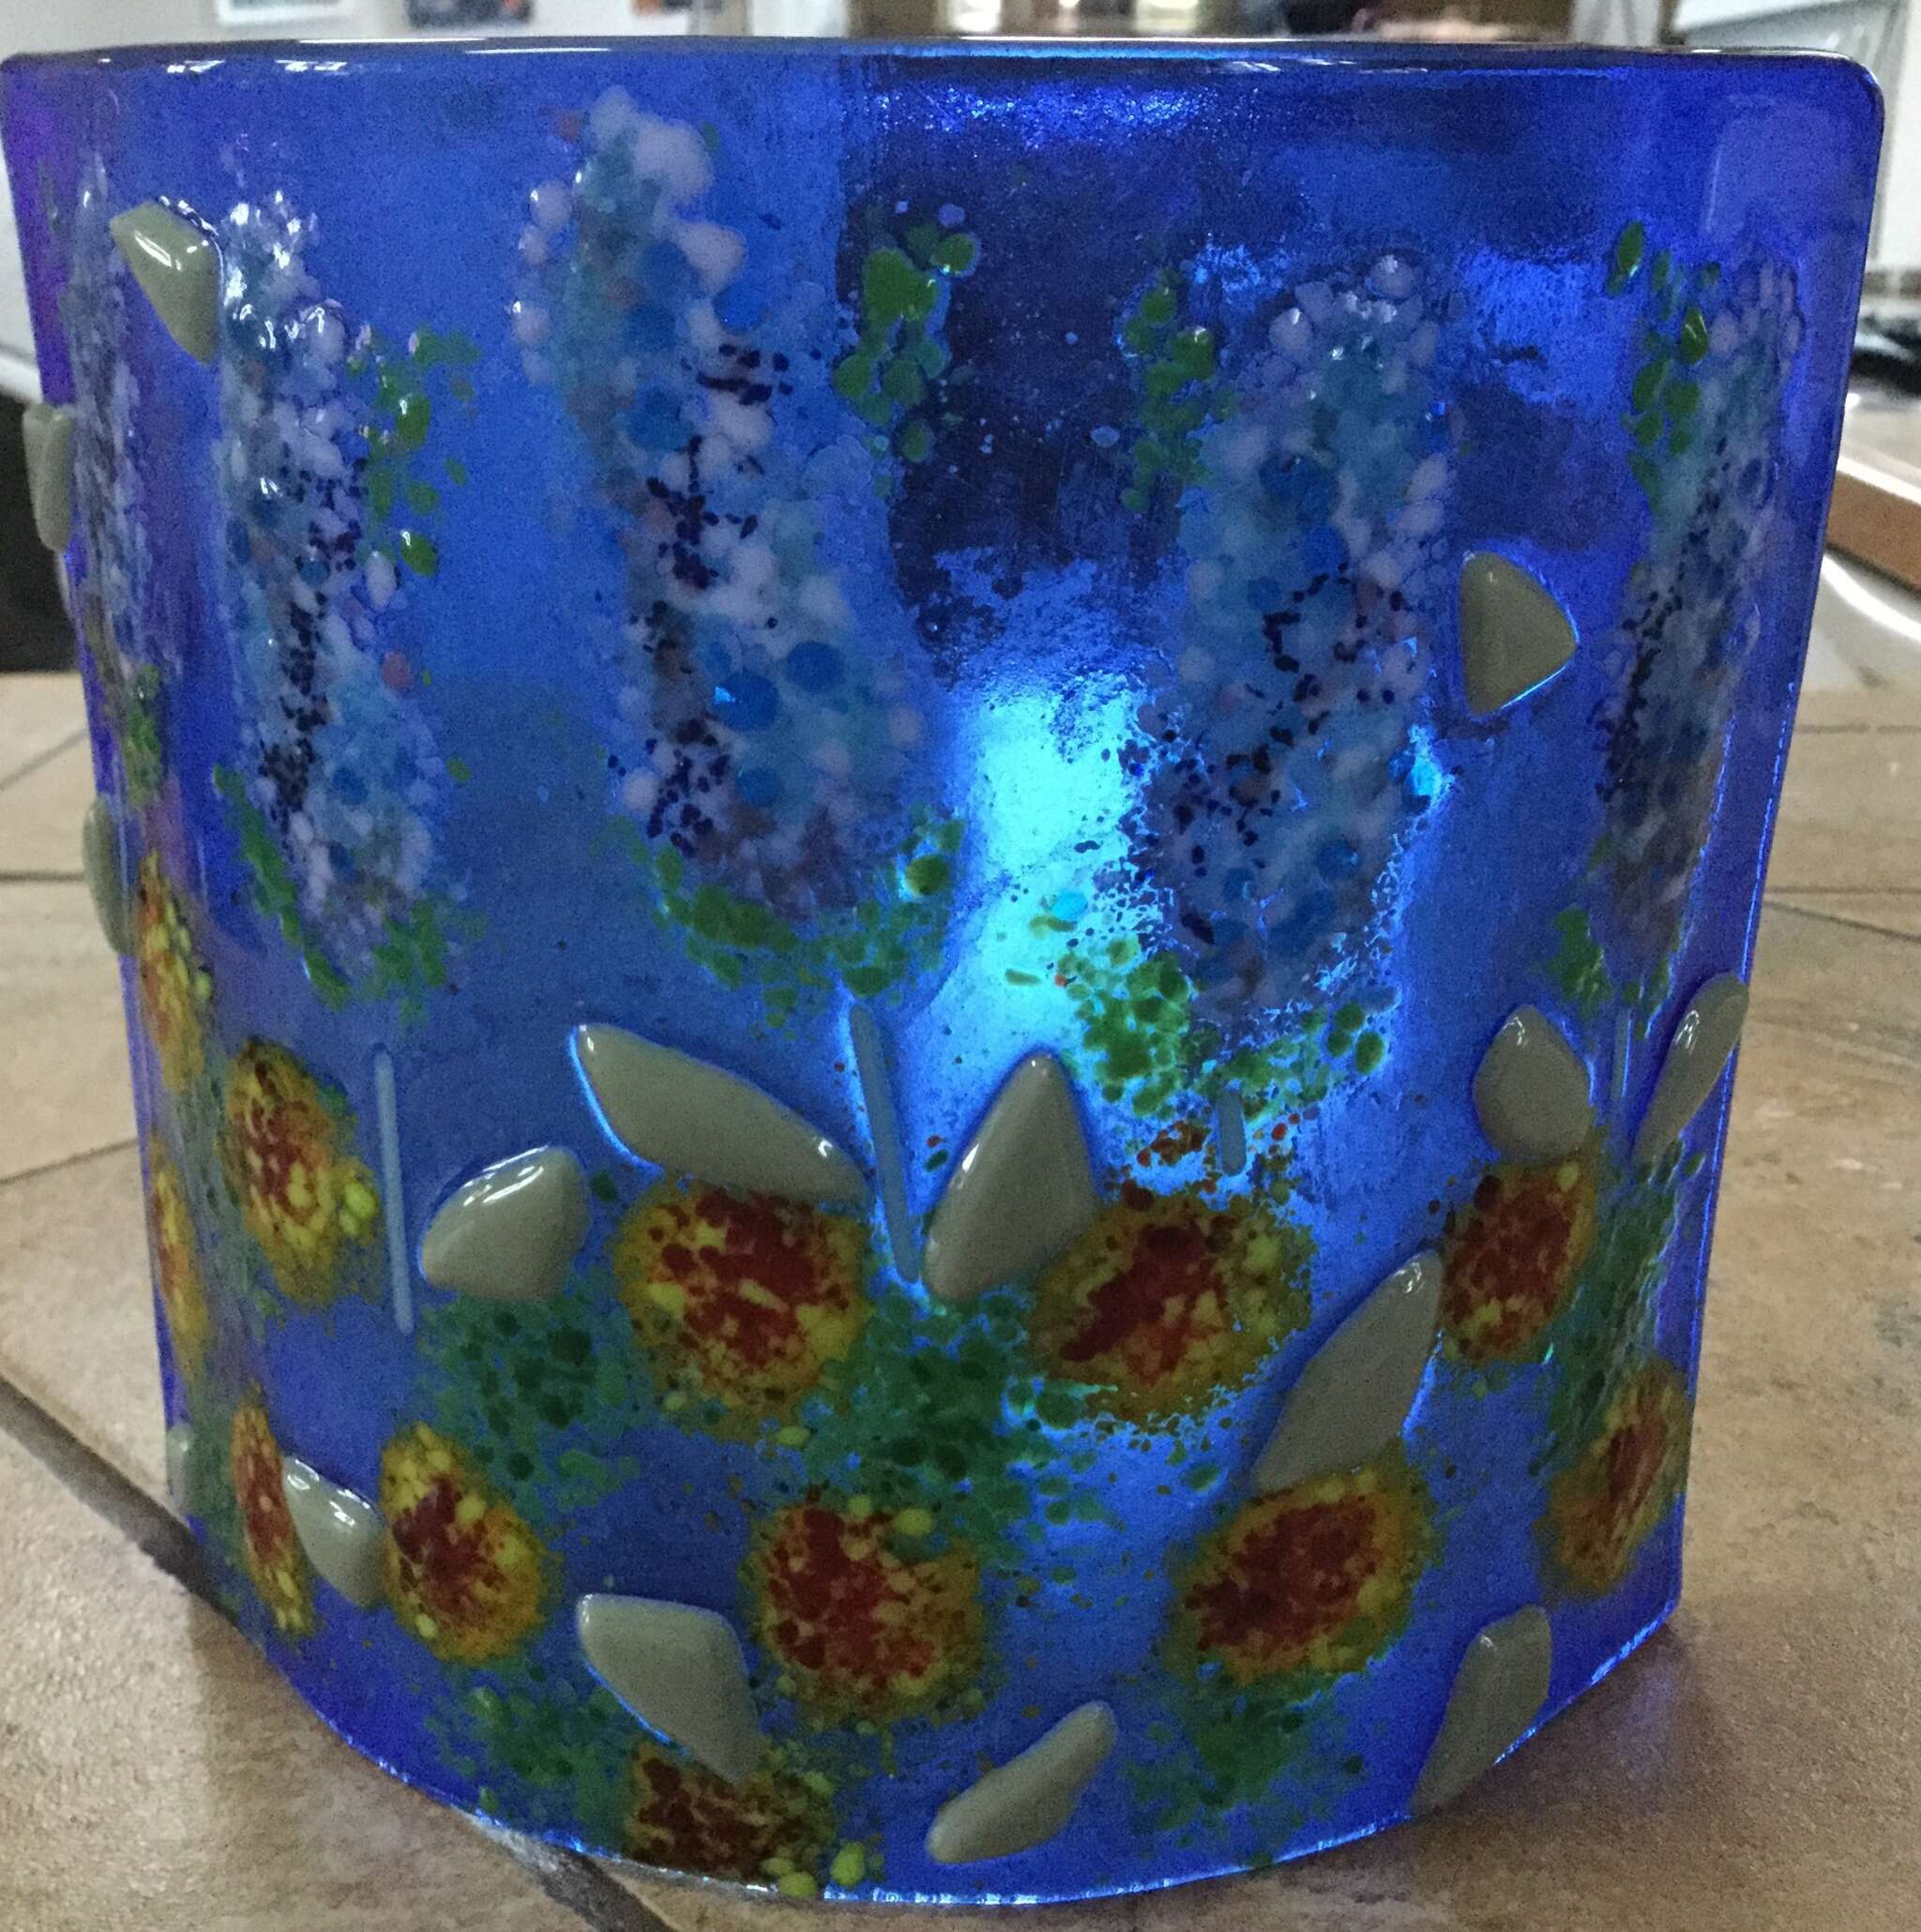 FUSED GLASS  workshops being offered at SSAC - Fused Glass by Steph Howe